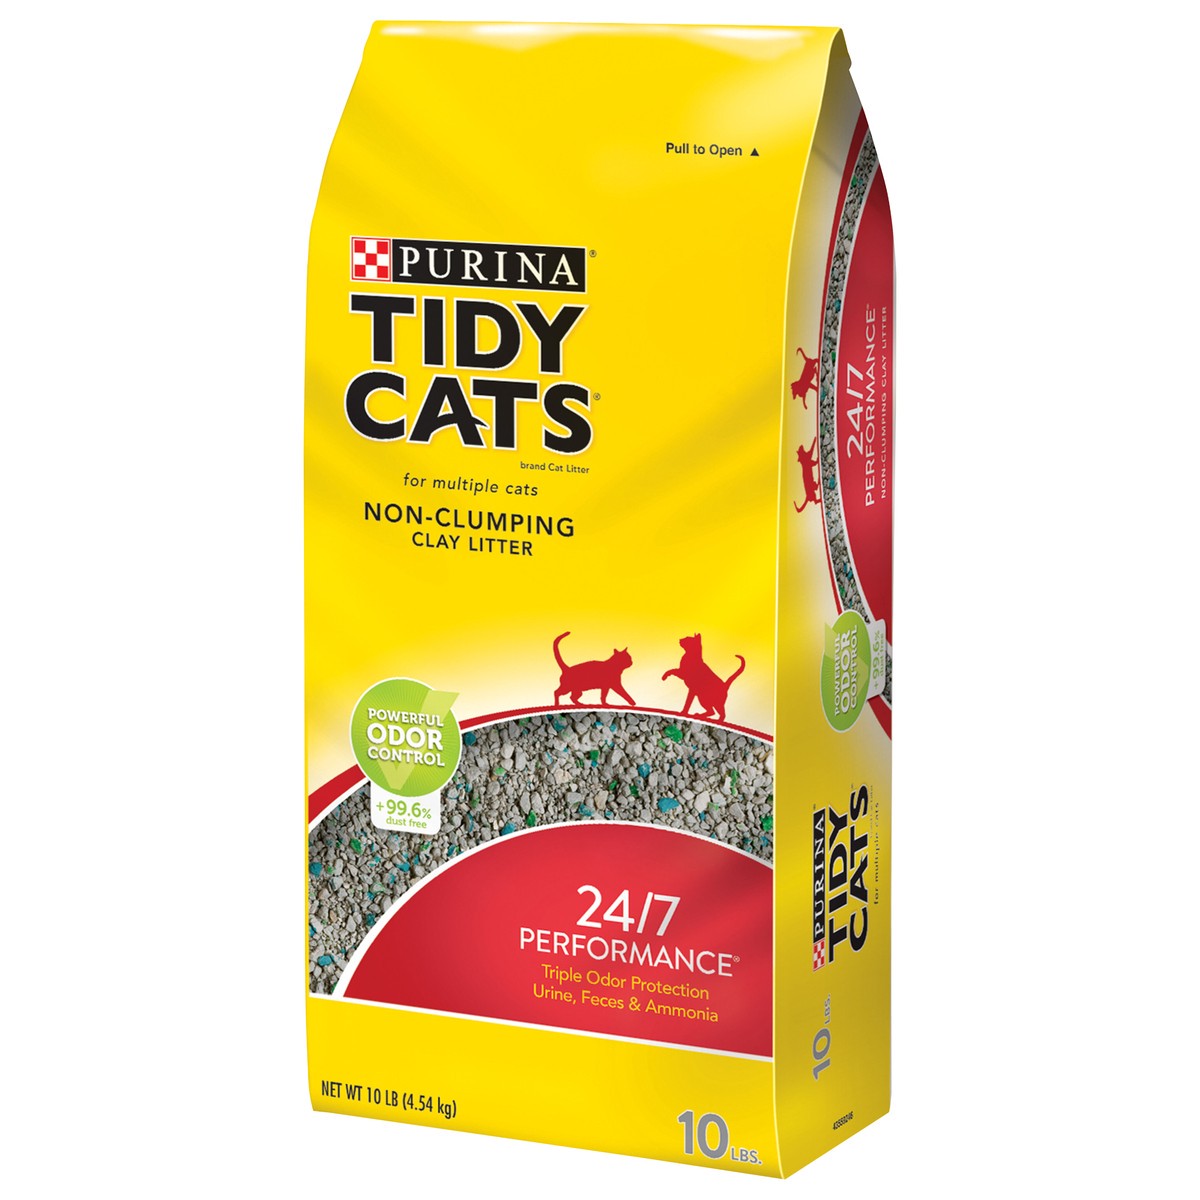 slide 2 of 9, Tidy Cats Purina Tidy Cats Non Clumping Cat Litter, 24/7 Performance Multi Cat Litter, 10 lb